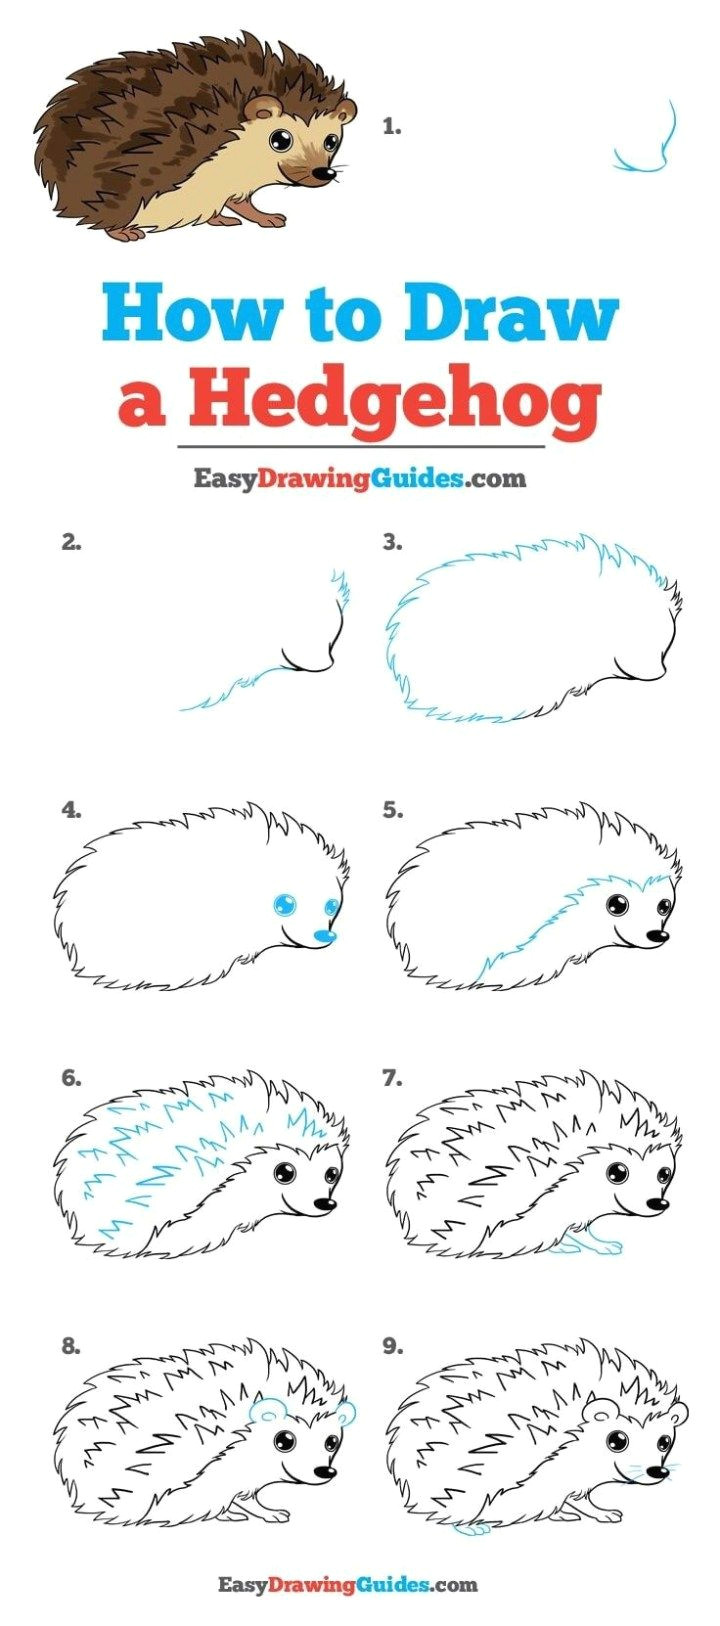 Hedgehog Drawing Easy 10 Cartoon Animal How to Drawings Drawing Tutorials for